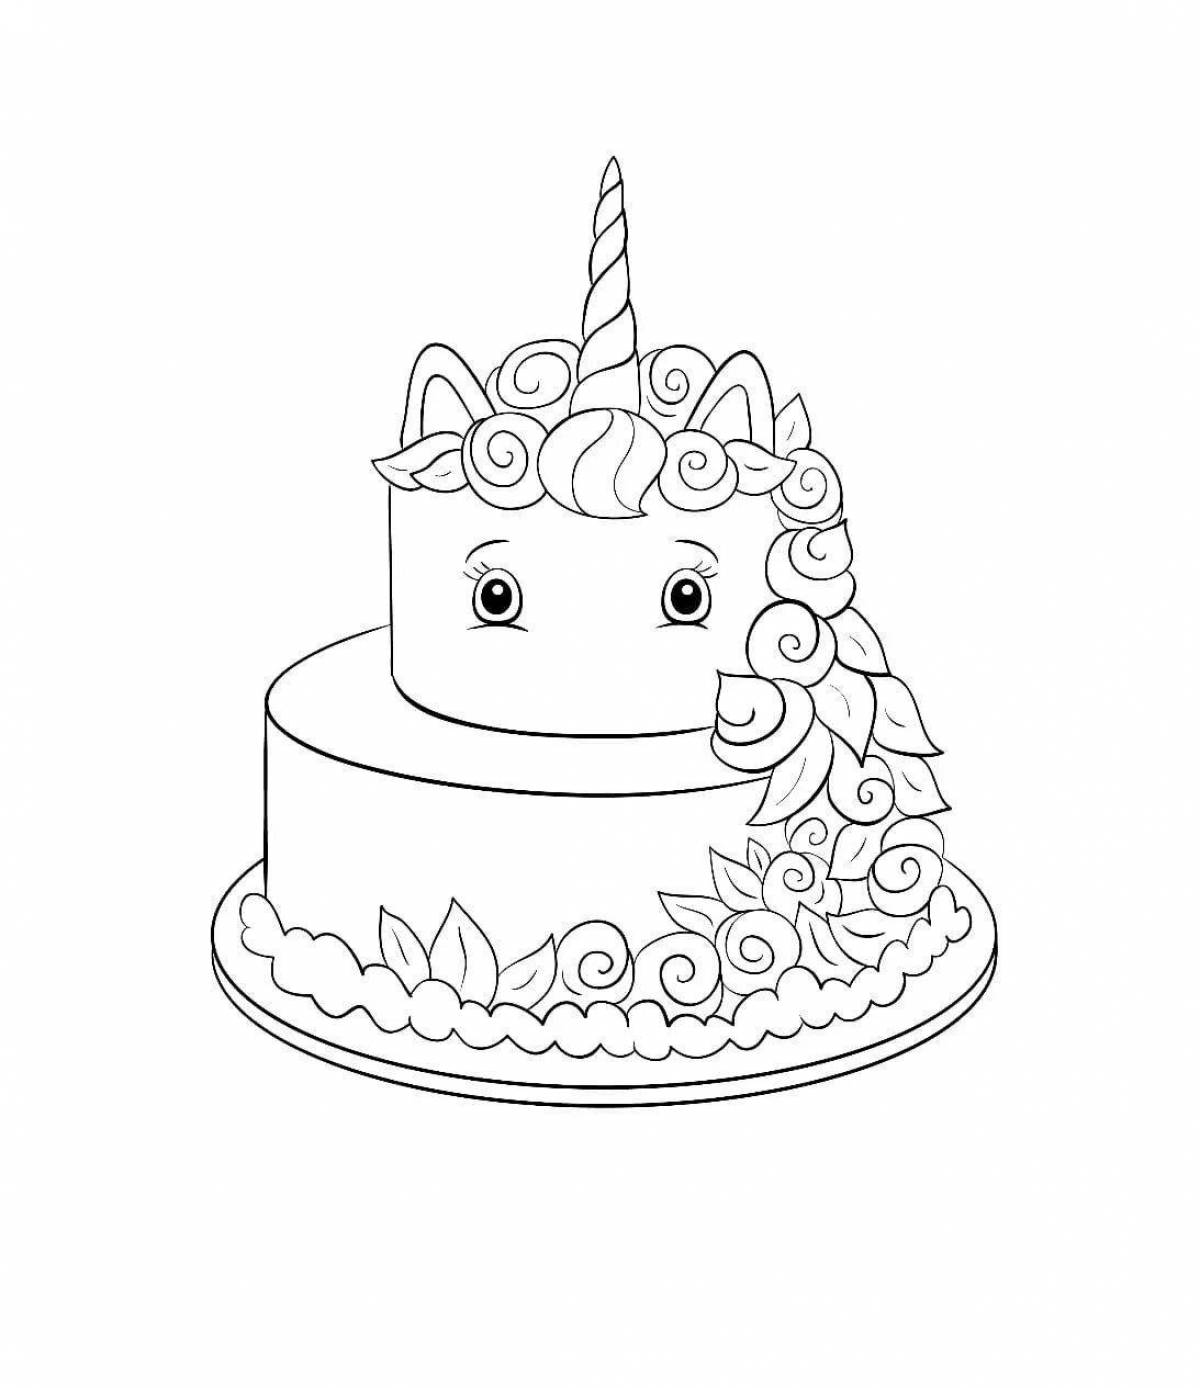 Color cake coloring page for 3-4 year olds